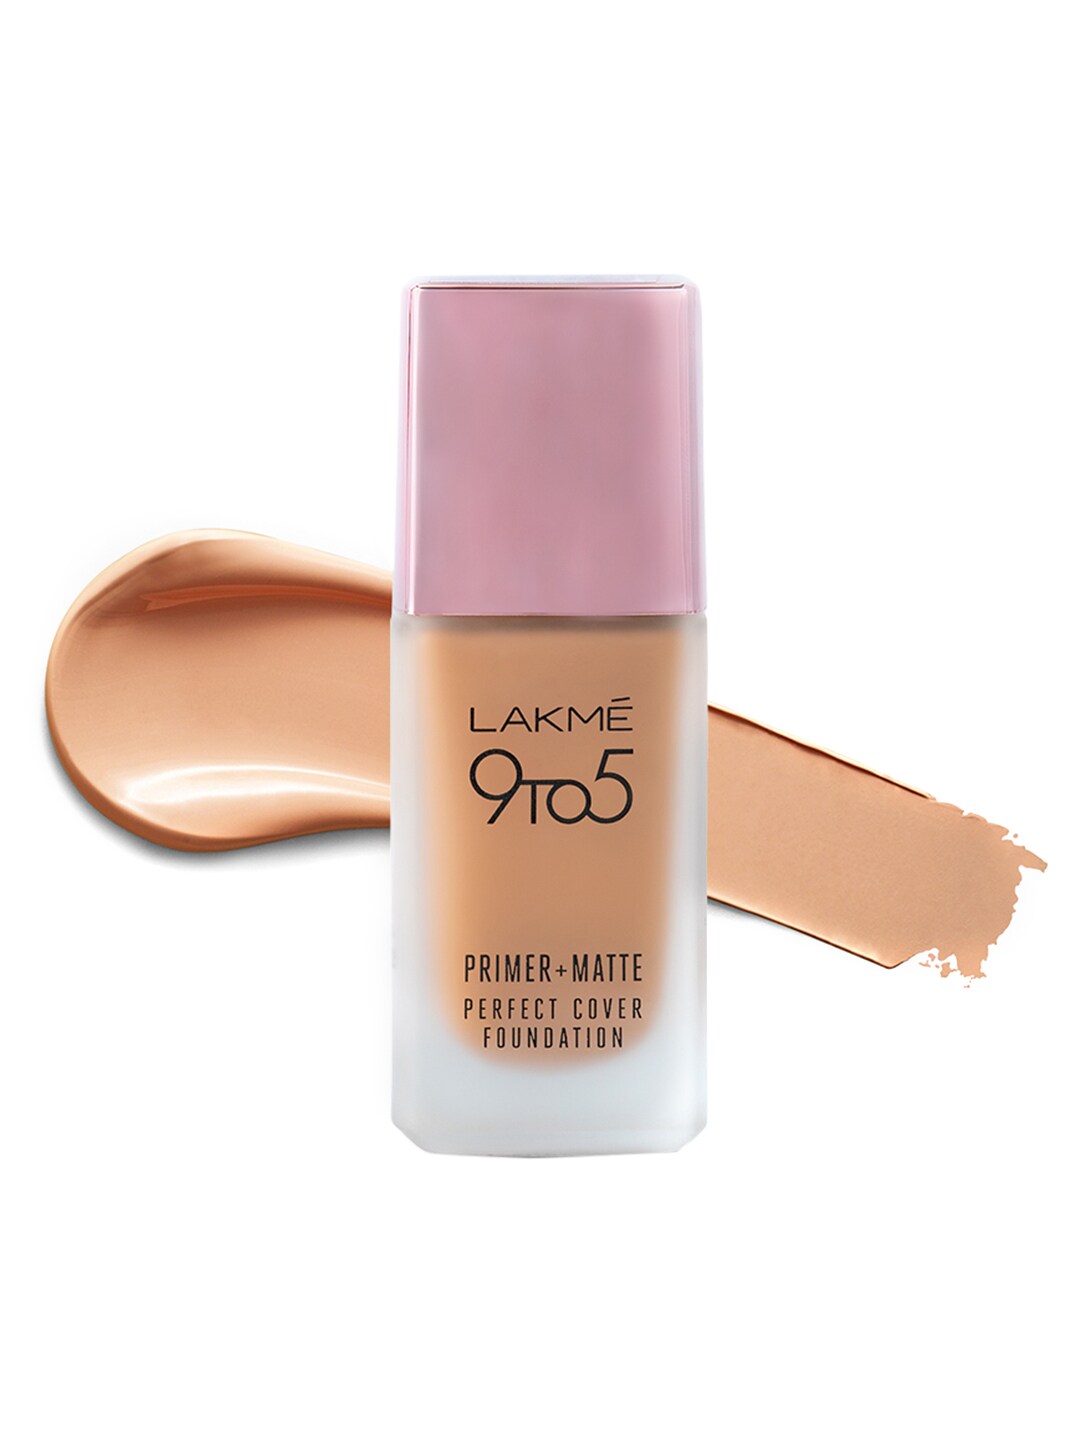 Lakme 9 To 5 Primer & Matte Perfect Cover Foundation - Warm Sand W160 25 ml Price in India